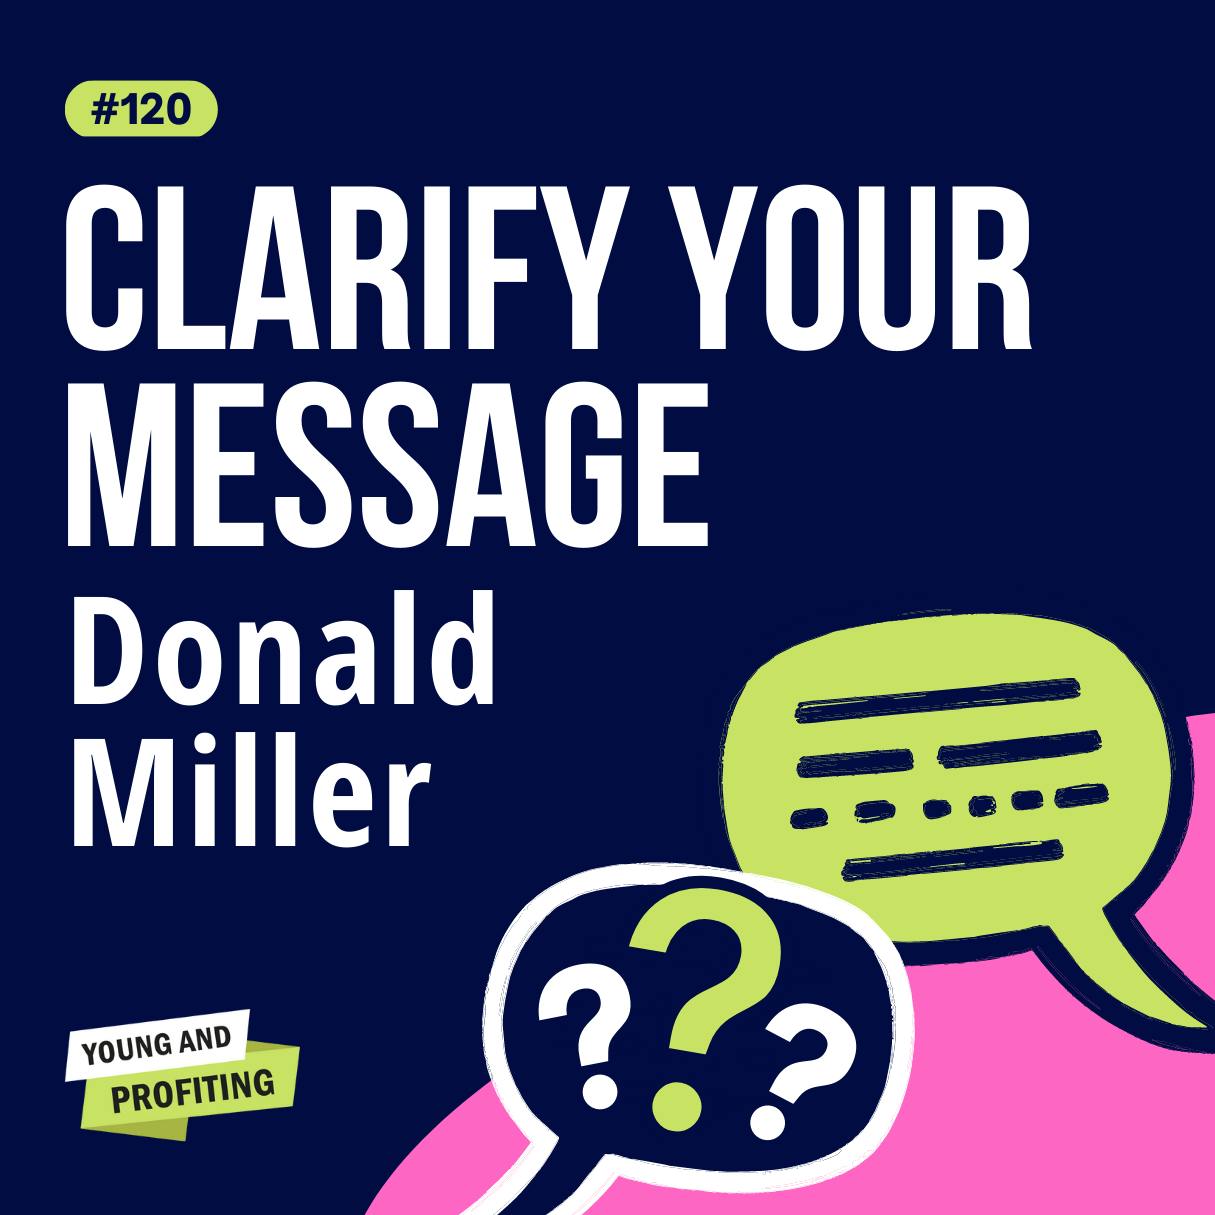 YAPClassic: Donald Miller on Storytelling for Business, How to Clarify Your Message So Customers Engage by Hala Taha | YAP Media Network